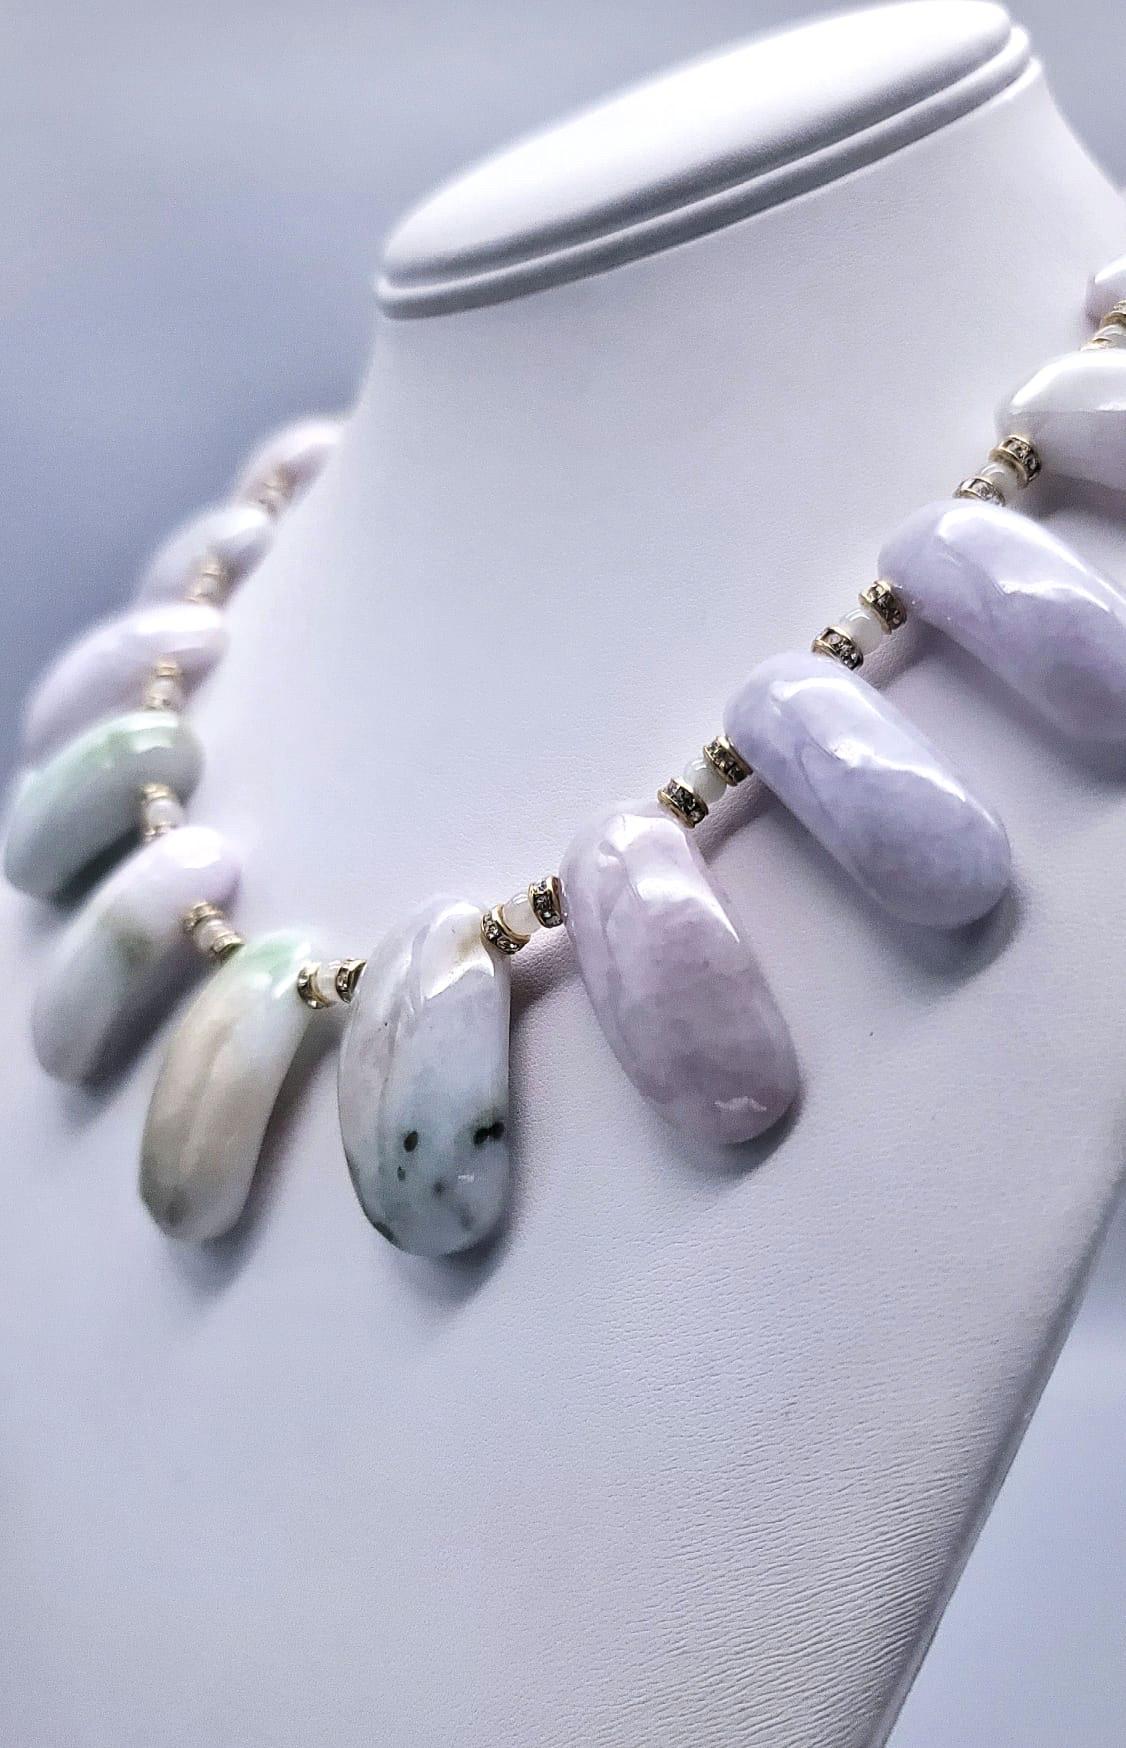 One-of-a-Kind

Indulge in the rare and exquisite beauty of Lavender Burma jade with this stunning necklace. Revered in Asia as the 